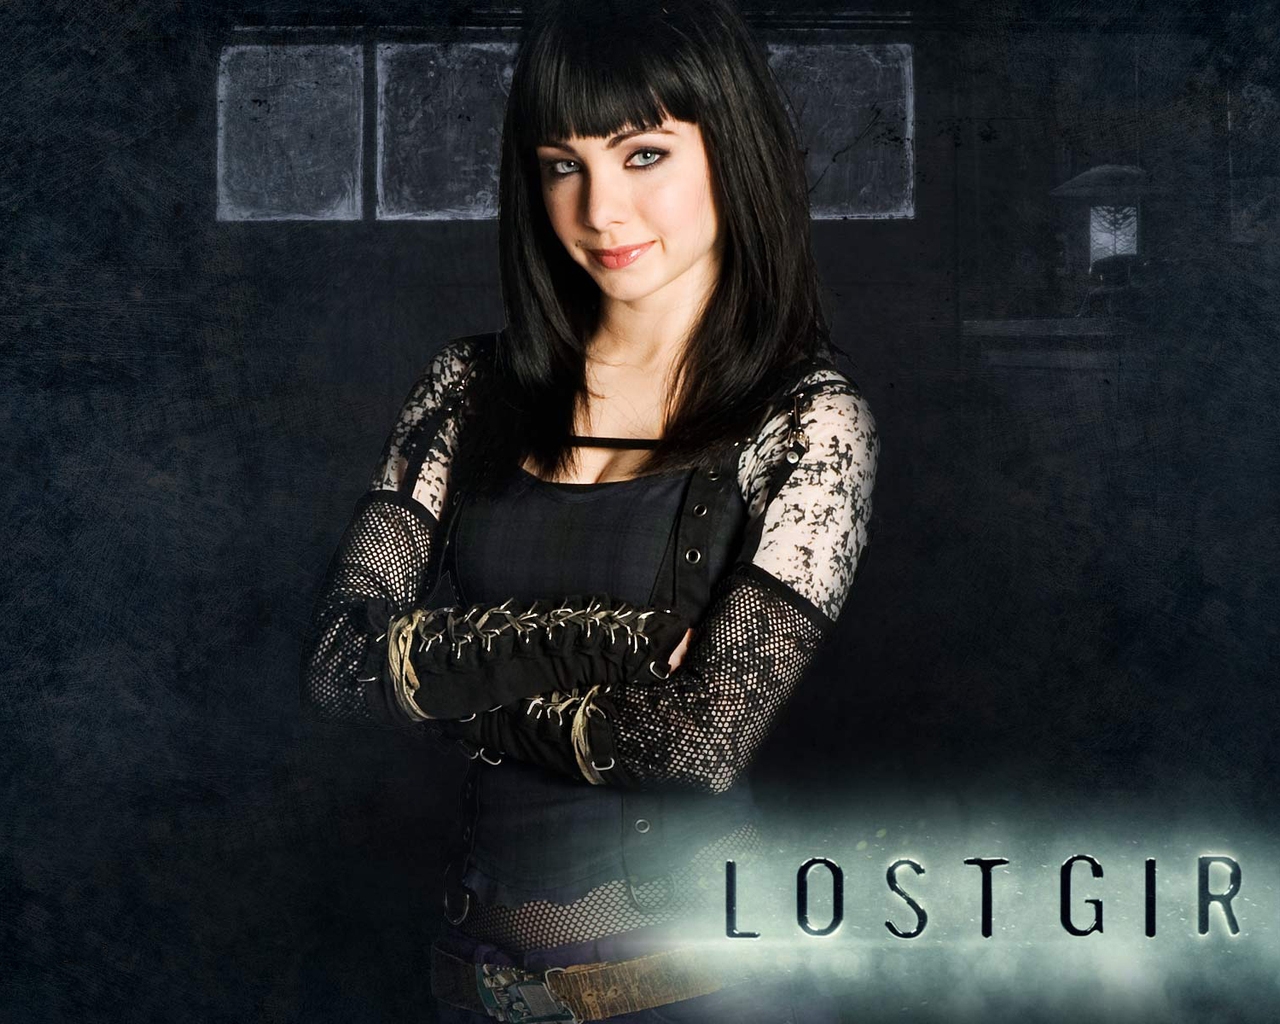 Lost Girl for 1280 x 1024 resolution